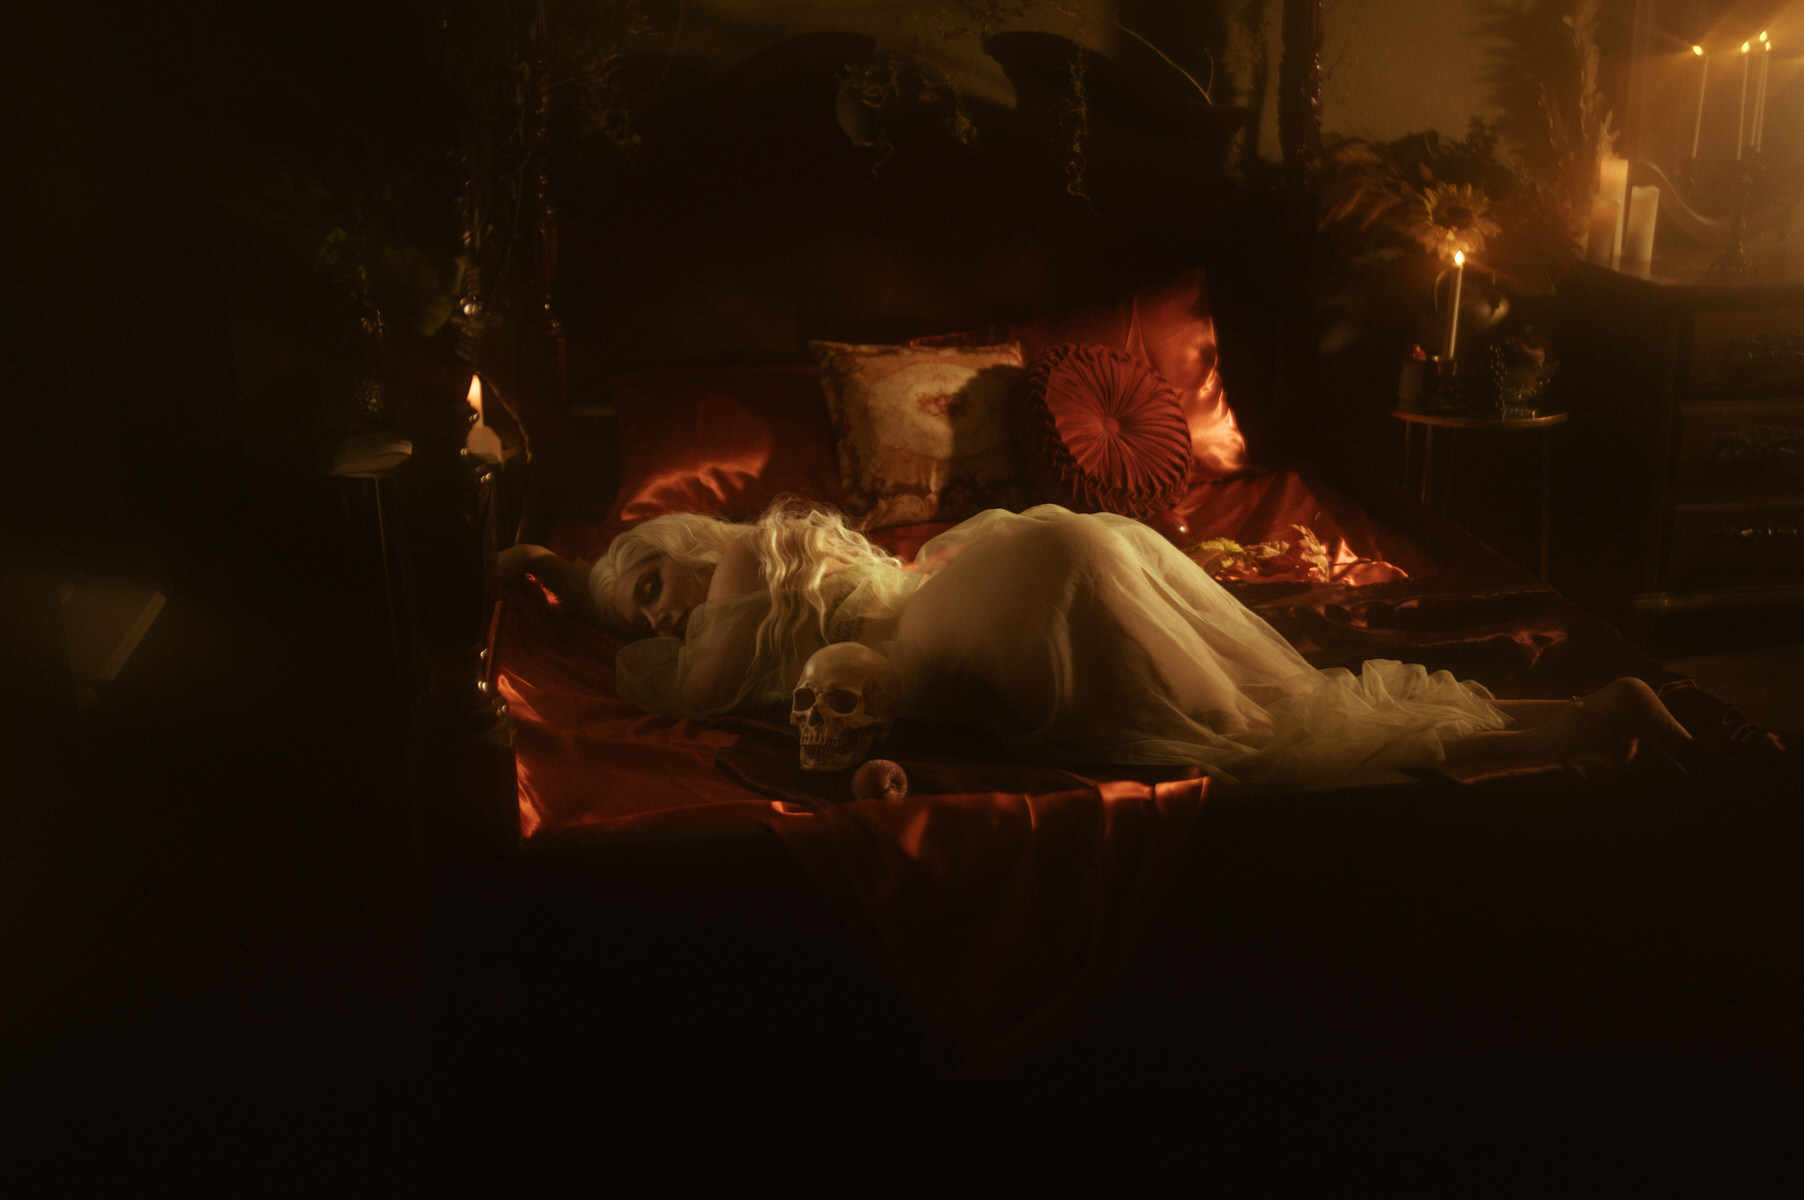 A woman in a white robe laying on her stomach on a bed with candles posing for a boudoir photoshoot.